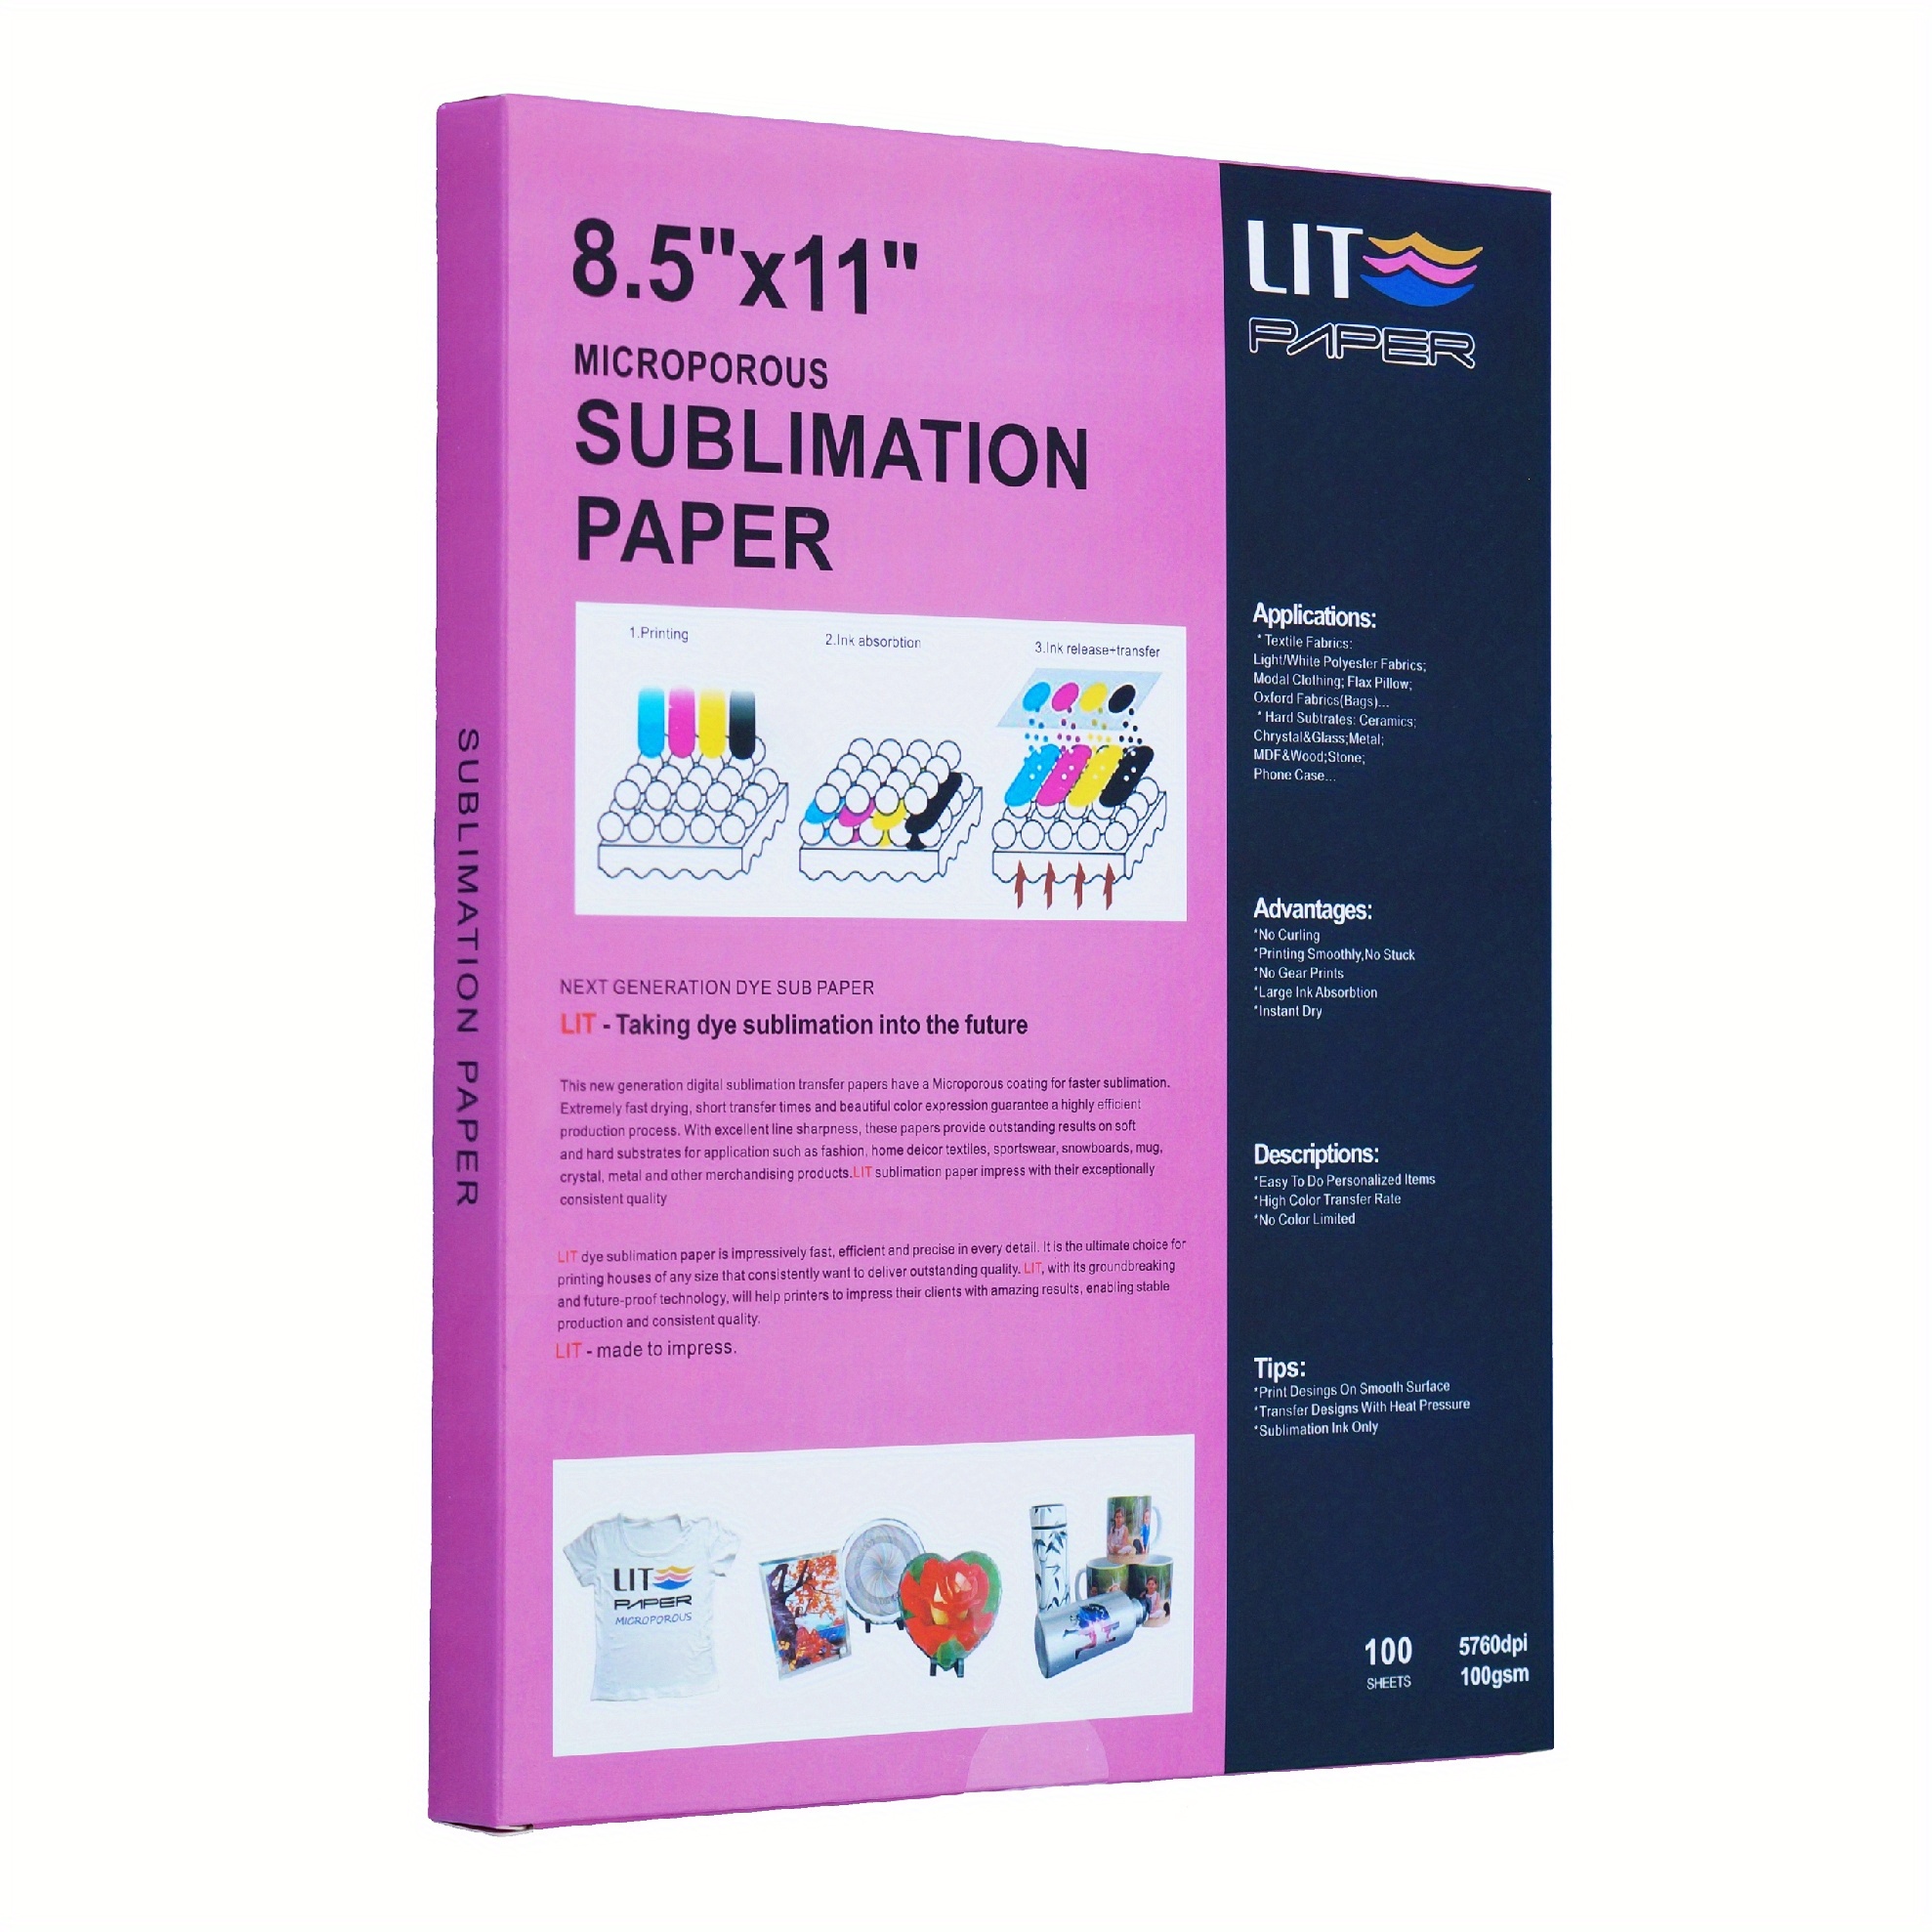 100 Sheets of Sublimation Paper - 8.5x11 Inch, 100gsm - Perfect for Epson,  Sawgrass, Ricoh & Printers - Create Custom Mugs, Tumblers, T-shirts & More!